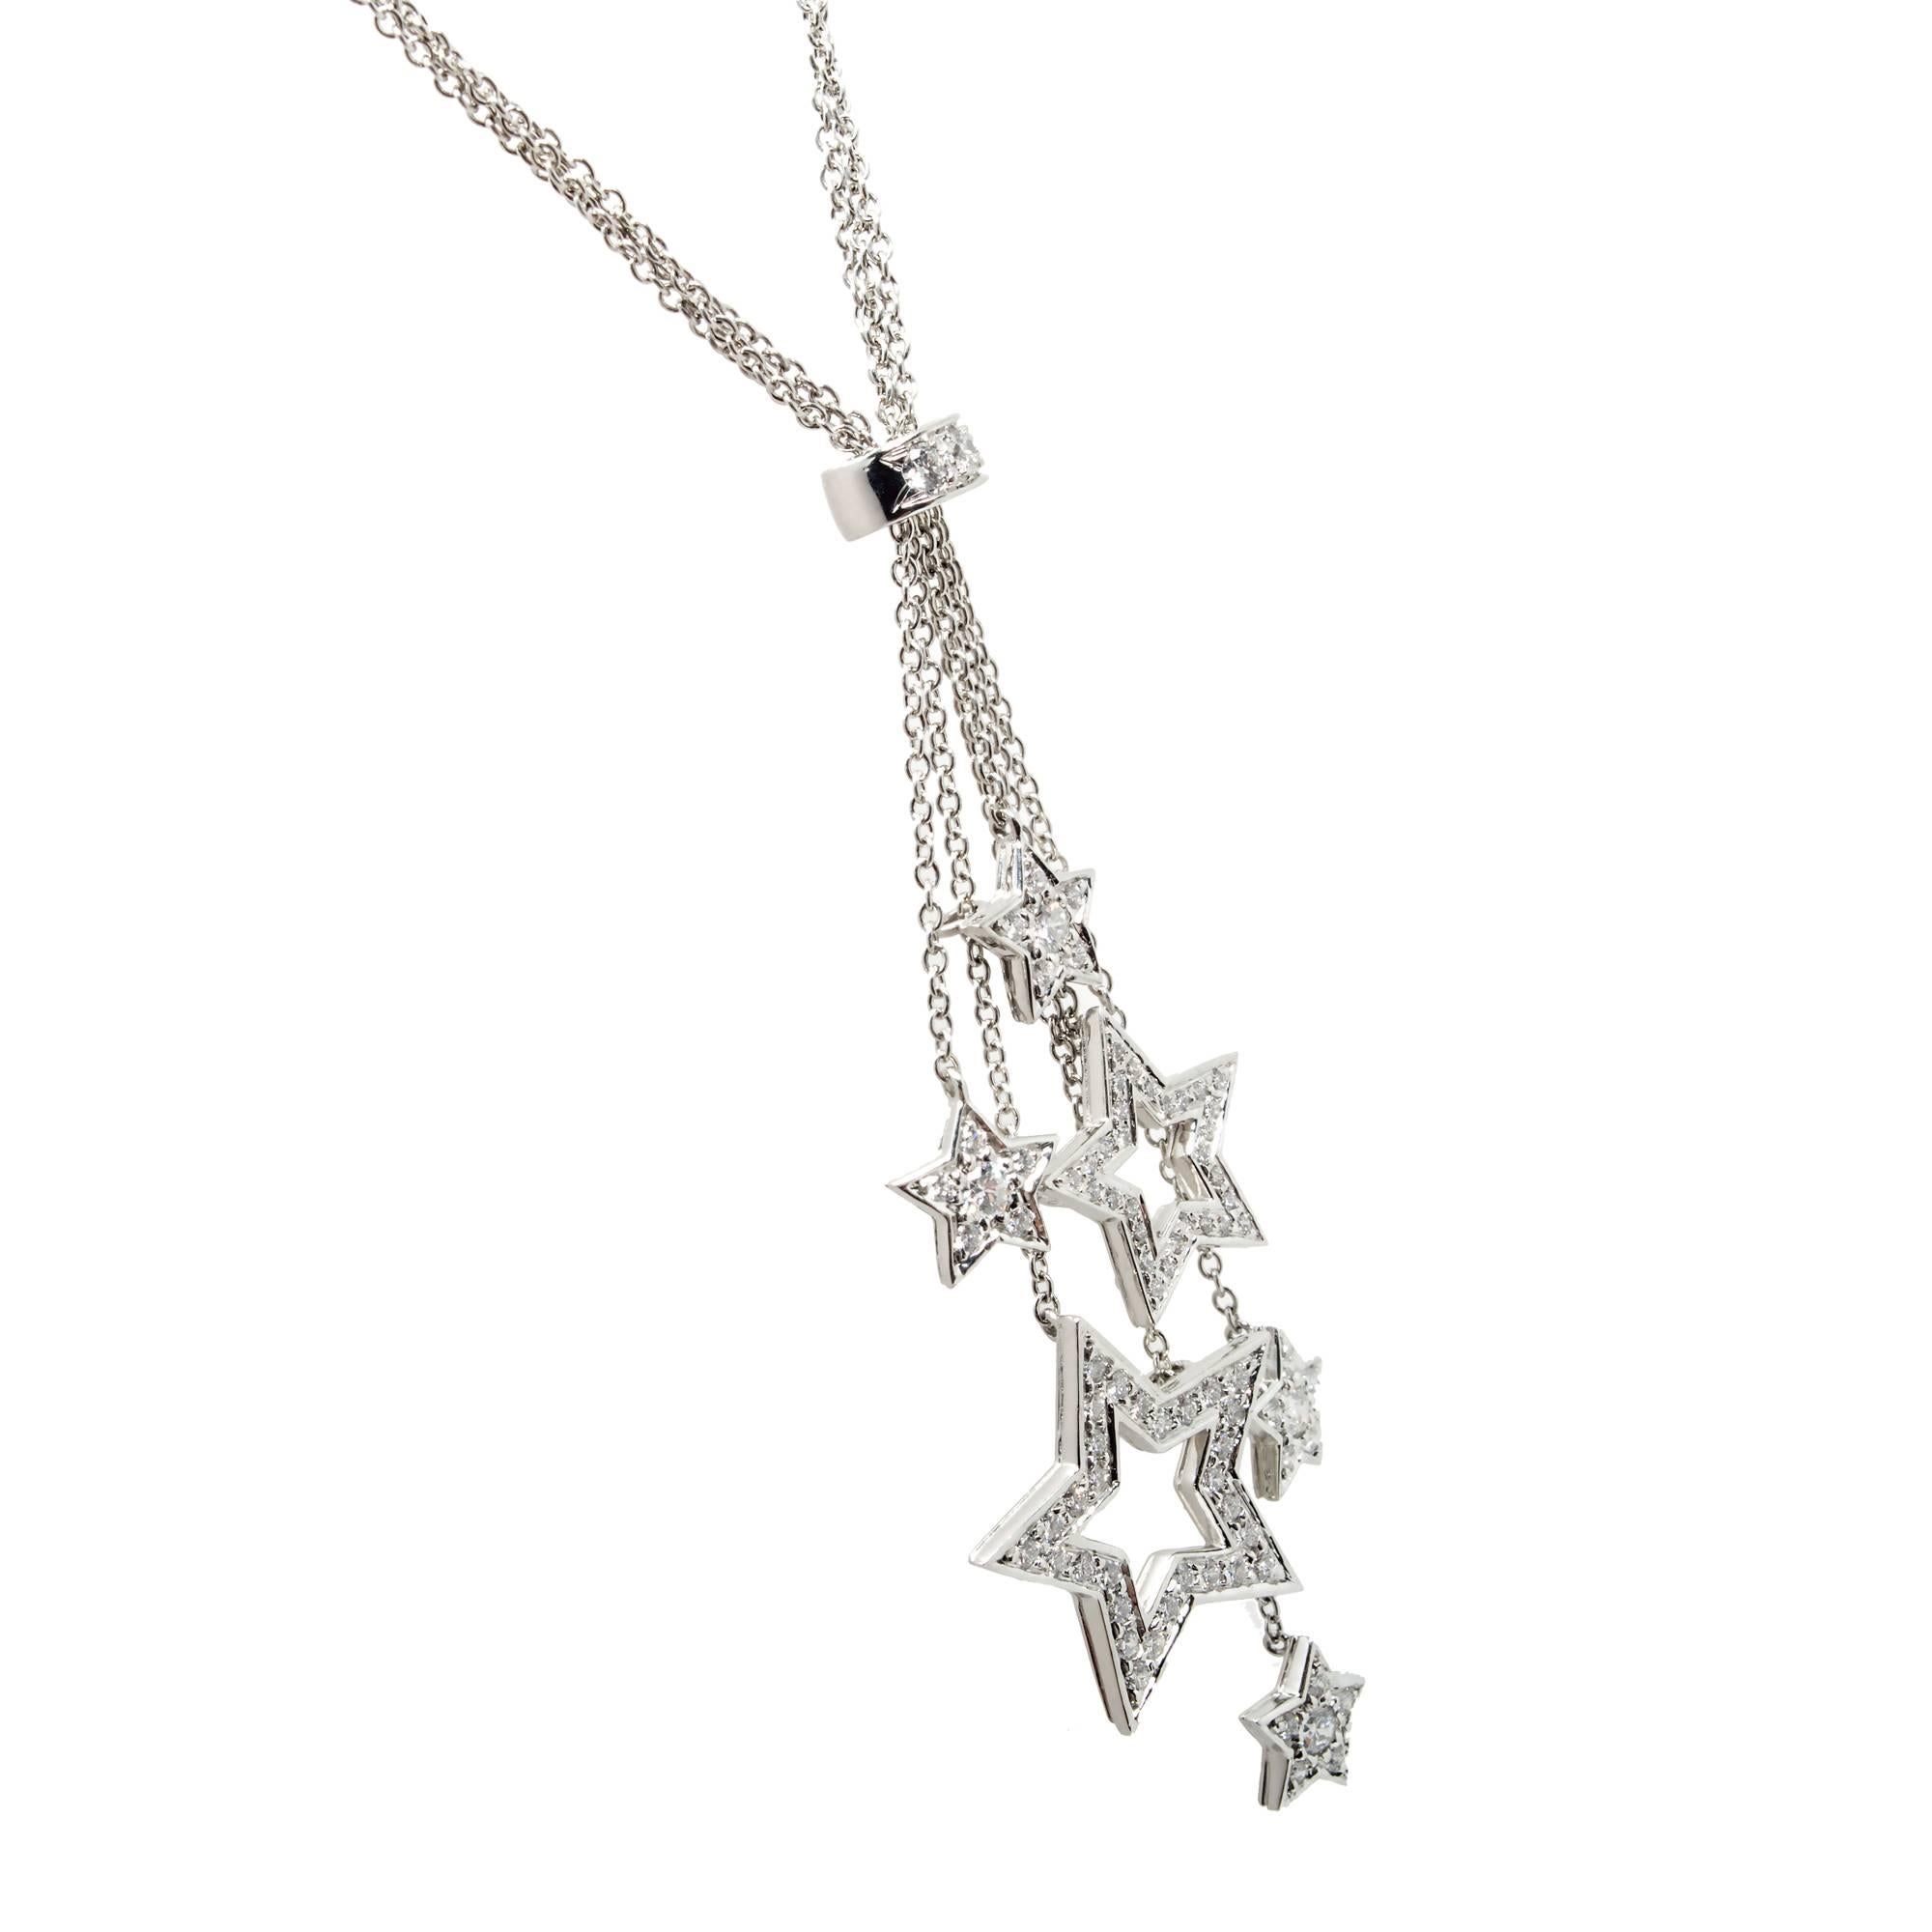 Tiffany & Co Platinum Diamond multi star necklace pendant. 

83 round diamonds full cut F VS approx. total weight .80 cts
Stamped: Pt950
Hallmark: c Tiffany & Co
Tested: Platinum
Top to Bottom: 57.48mm or 2.26 inches
Width: 19.96 mm or .78